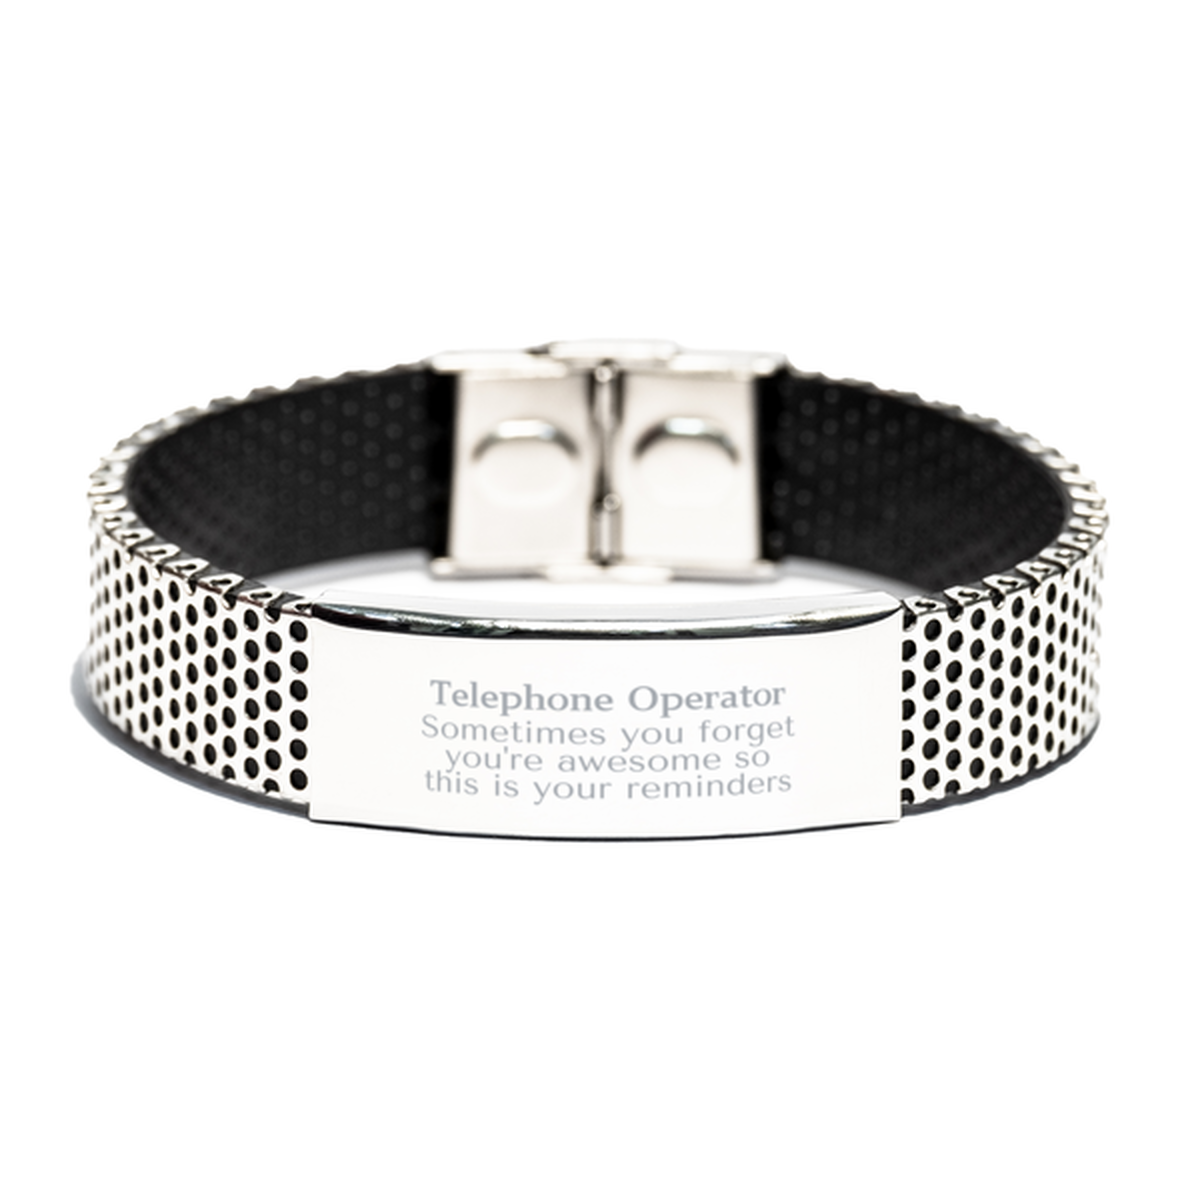 Sentimental Telephone Operator Stainless Steel Bracelet, Telephone Operator Sometimes you forget you're awesome so this is your reminders, Graduation Christmas Birthday Gifts for Telephone Operator, Men, Women, Coworkers